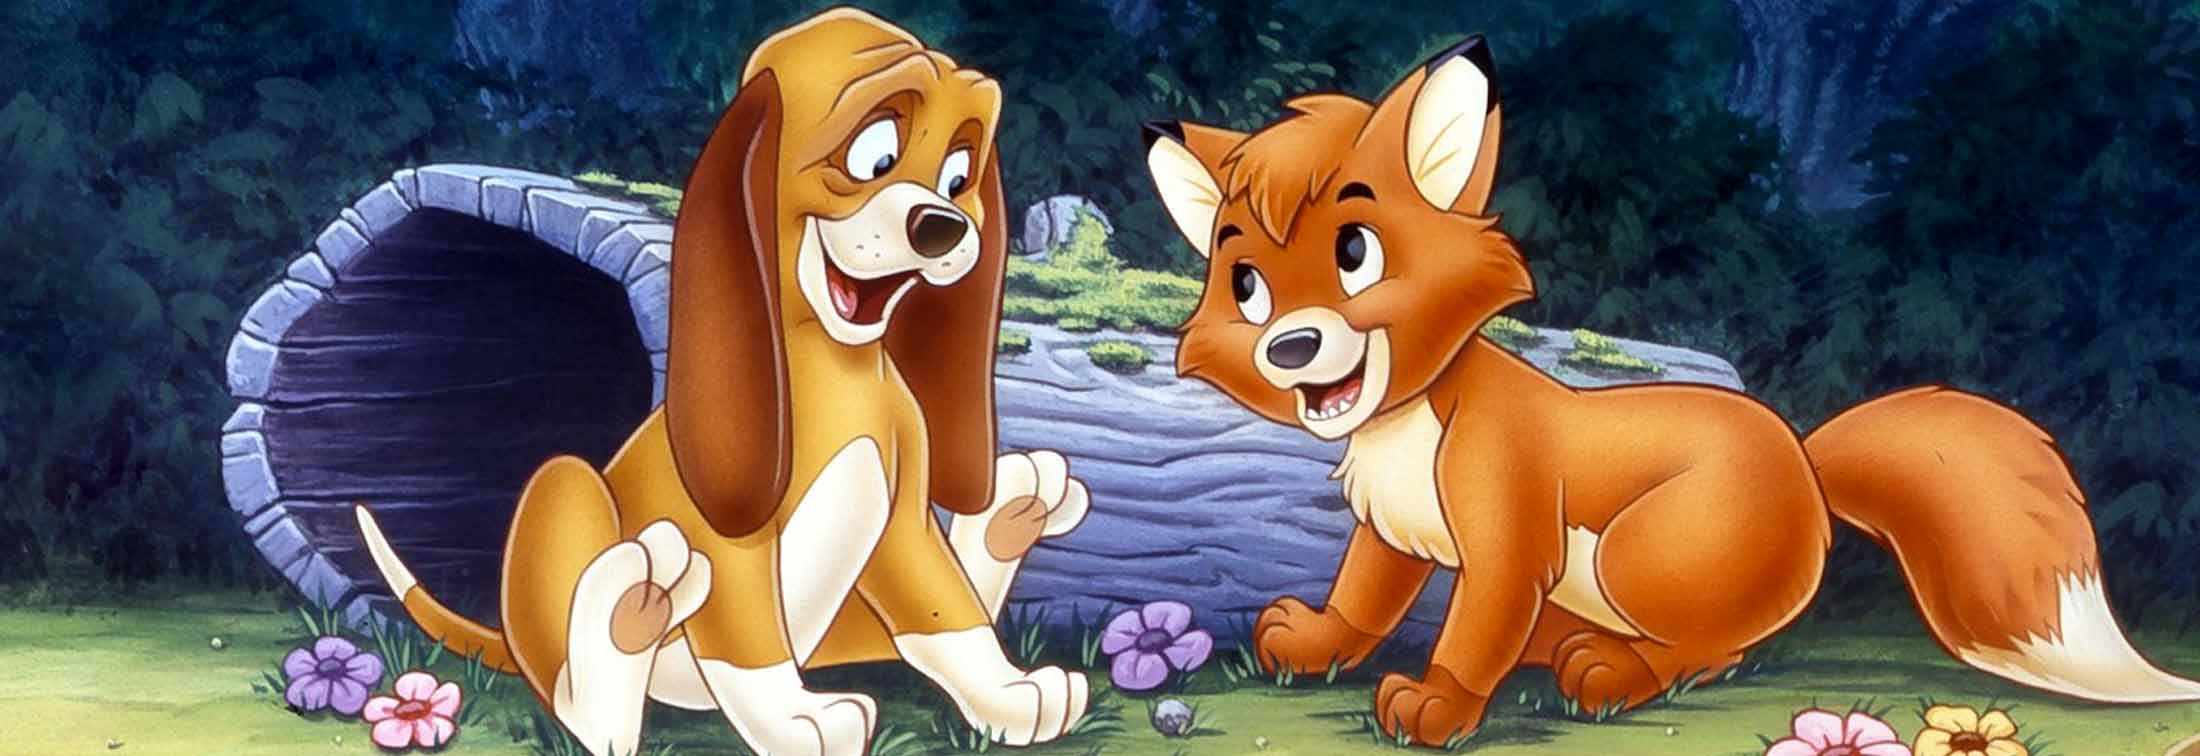 The Fox and the Hound - Celebrating 40 years since Disney's saddest tail